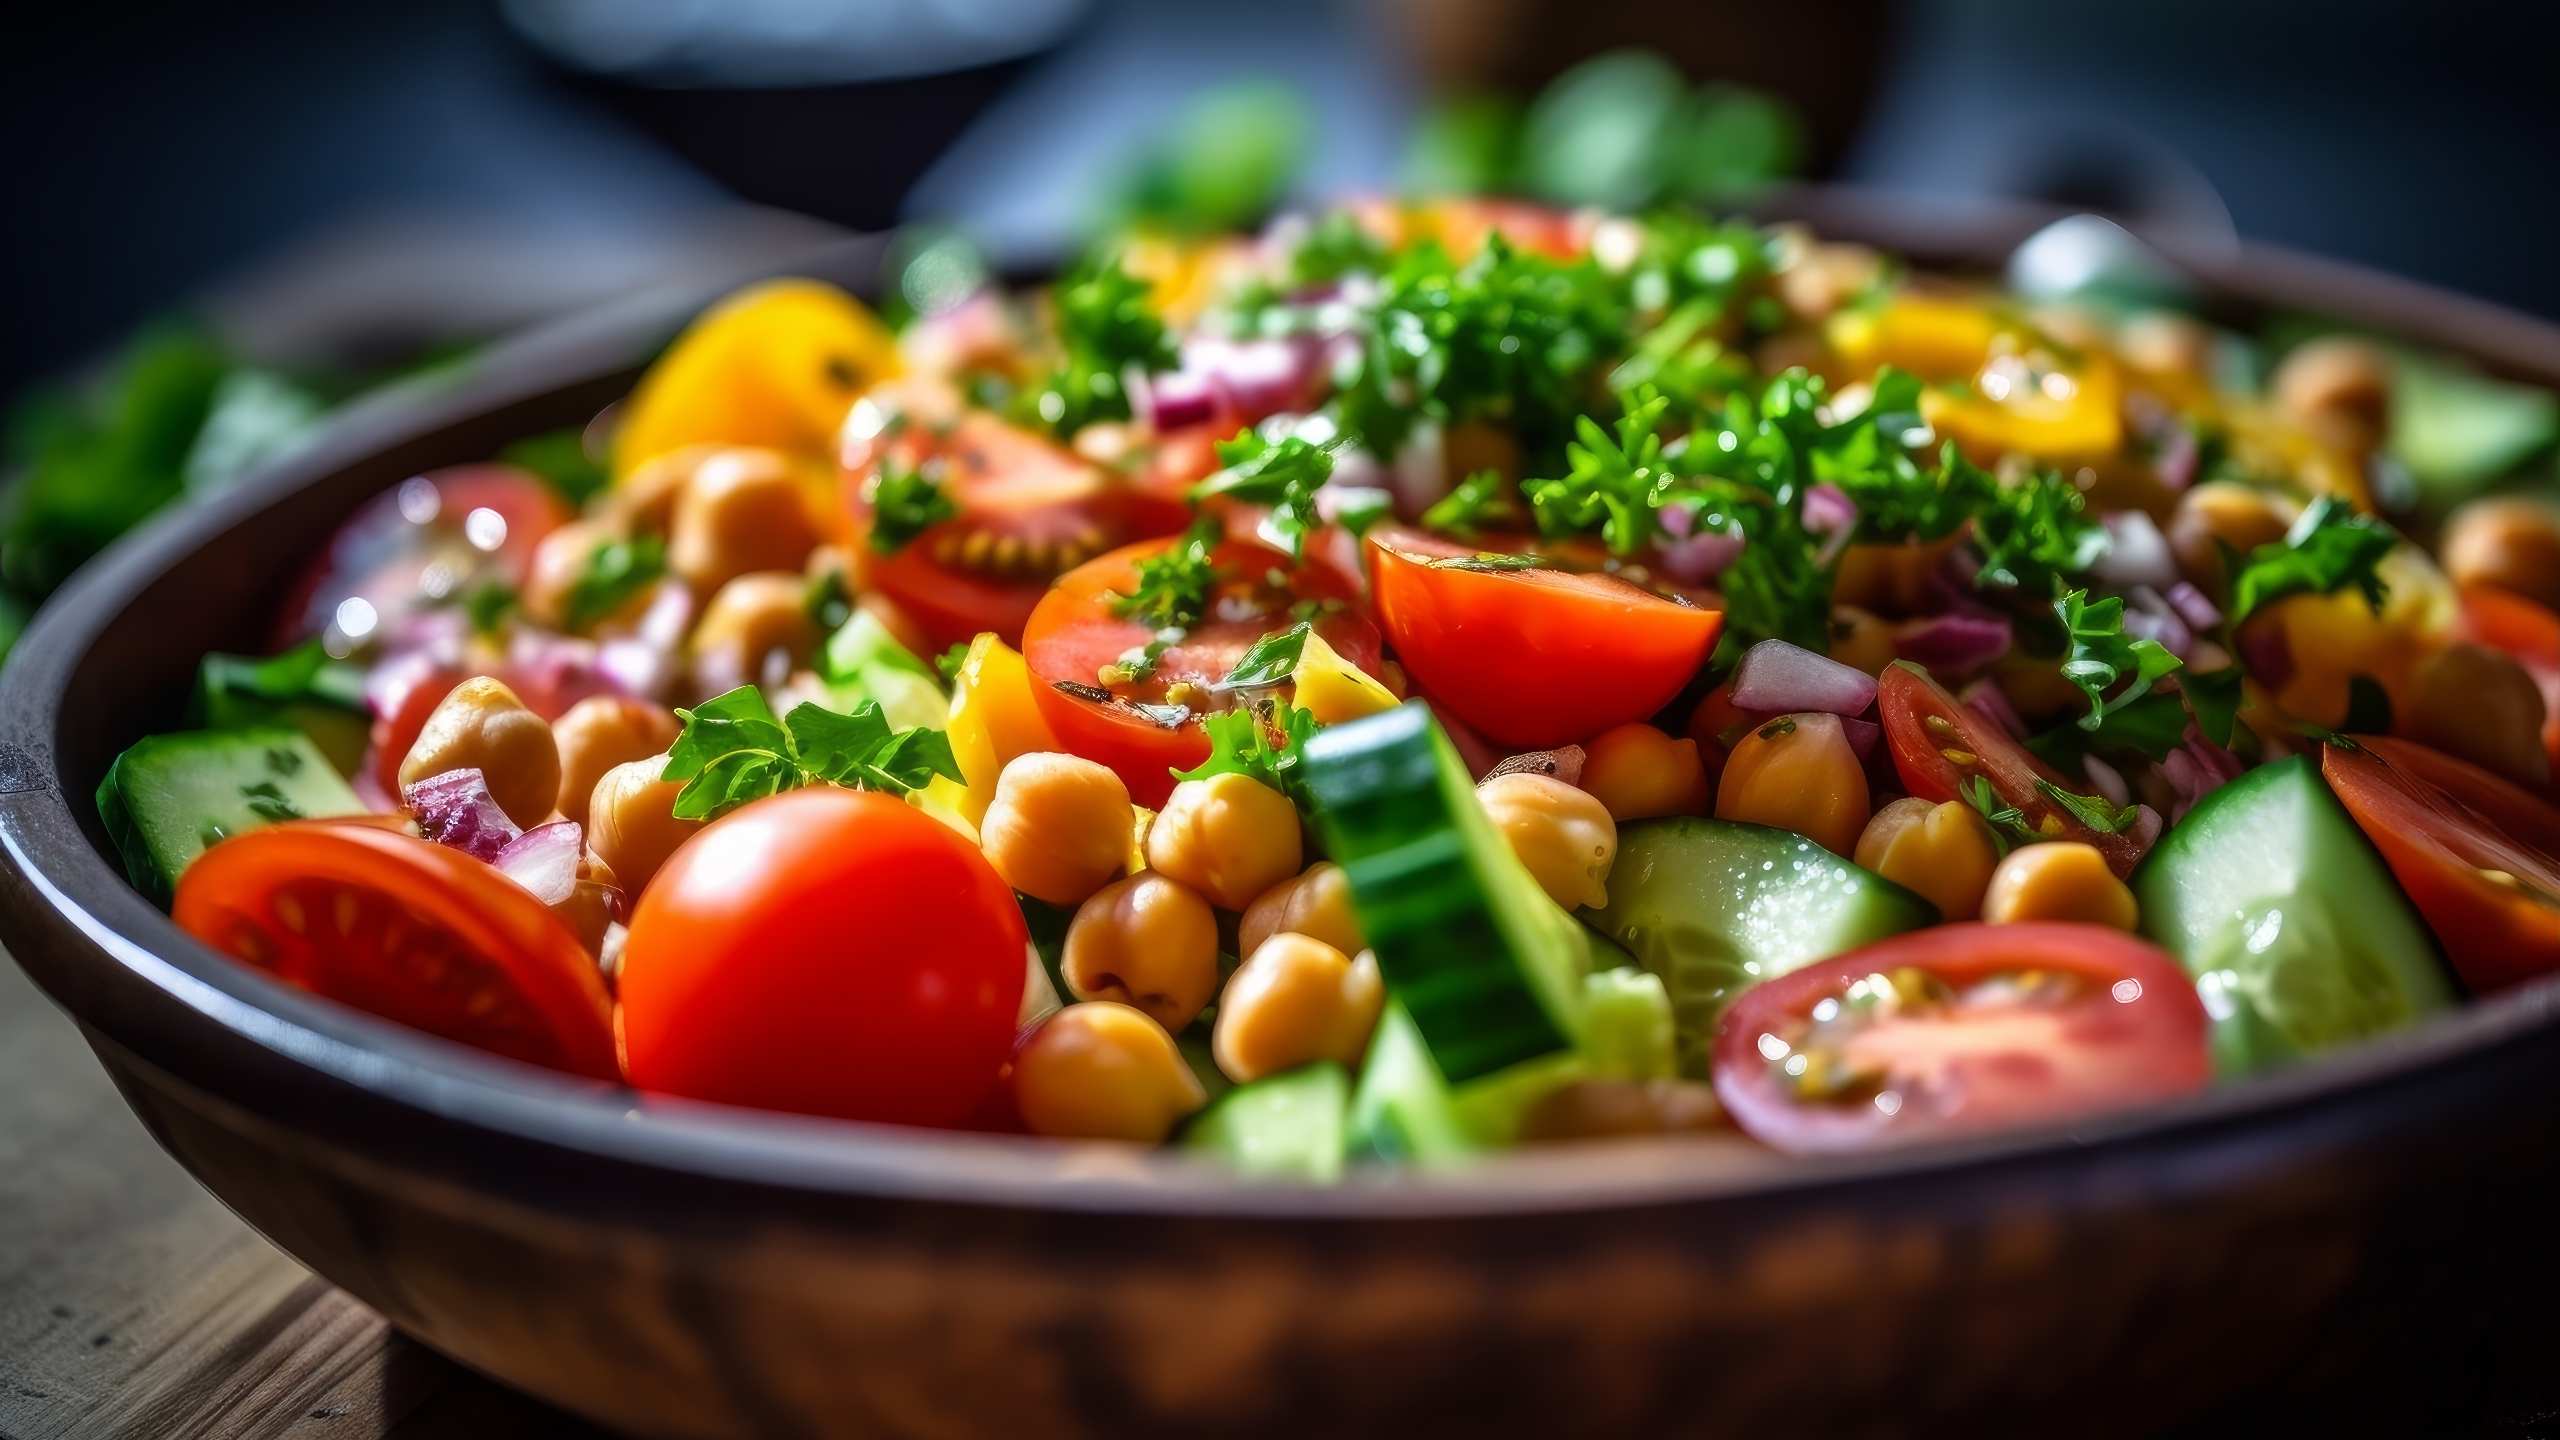 Plants for dinner? Discover the plant-based diet